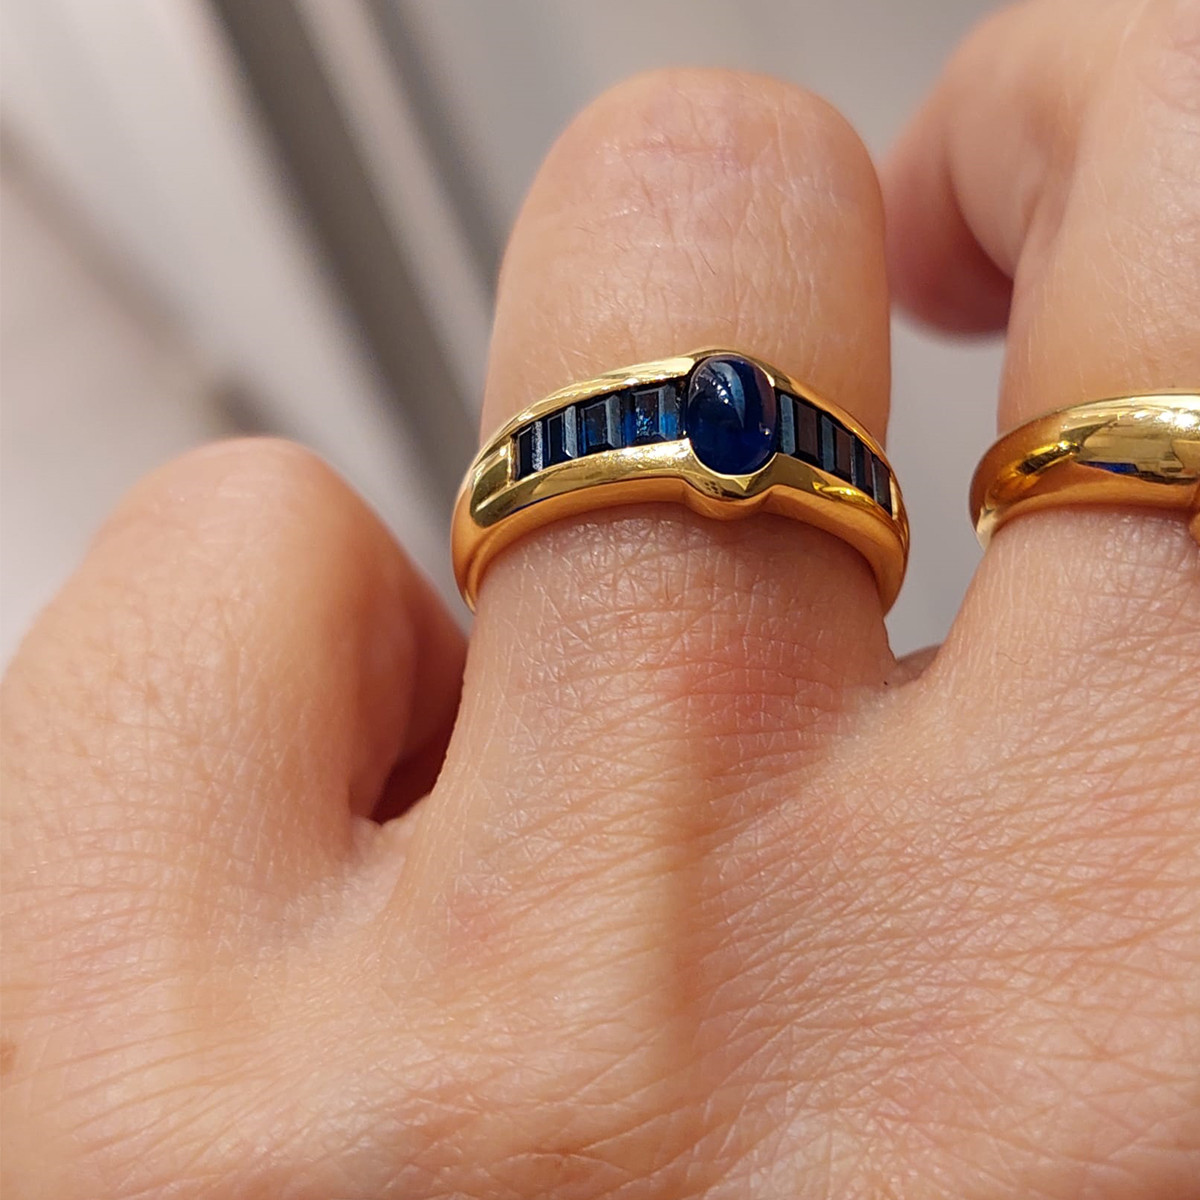 RING YELLOW GOLD AND BLUE SAPPHIRES